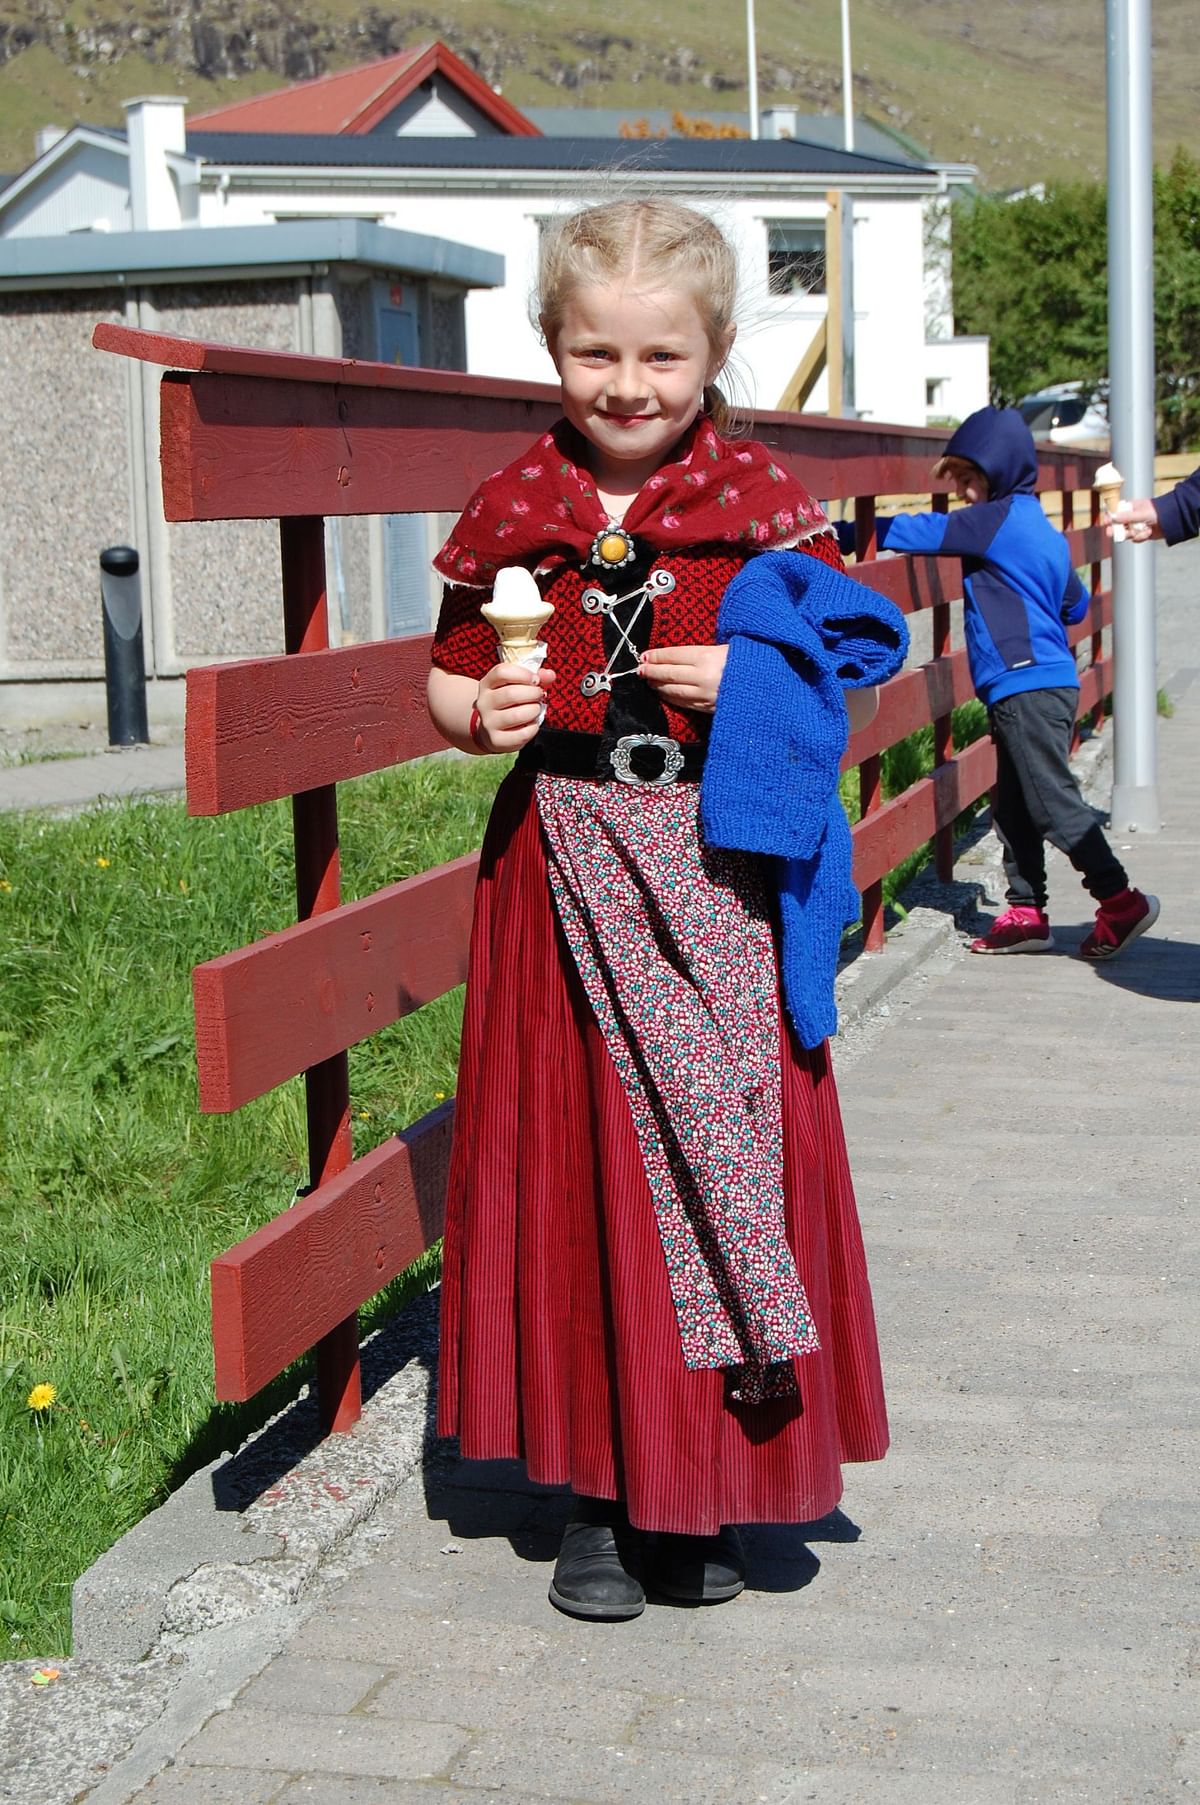 A child poses on 3 June 2018 in a traditional Faroese outfit during a festival in Klaksvík, on the island of Borooy, one of the Faroe Islands located between the North Atlantic Ocean and Norwegian Sea. Photo: AFP